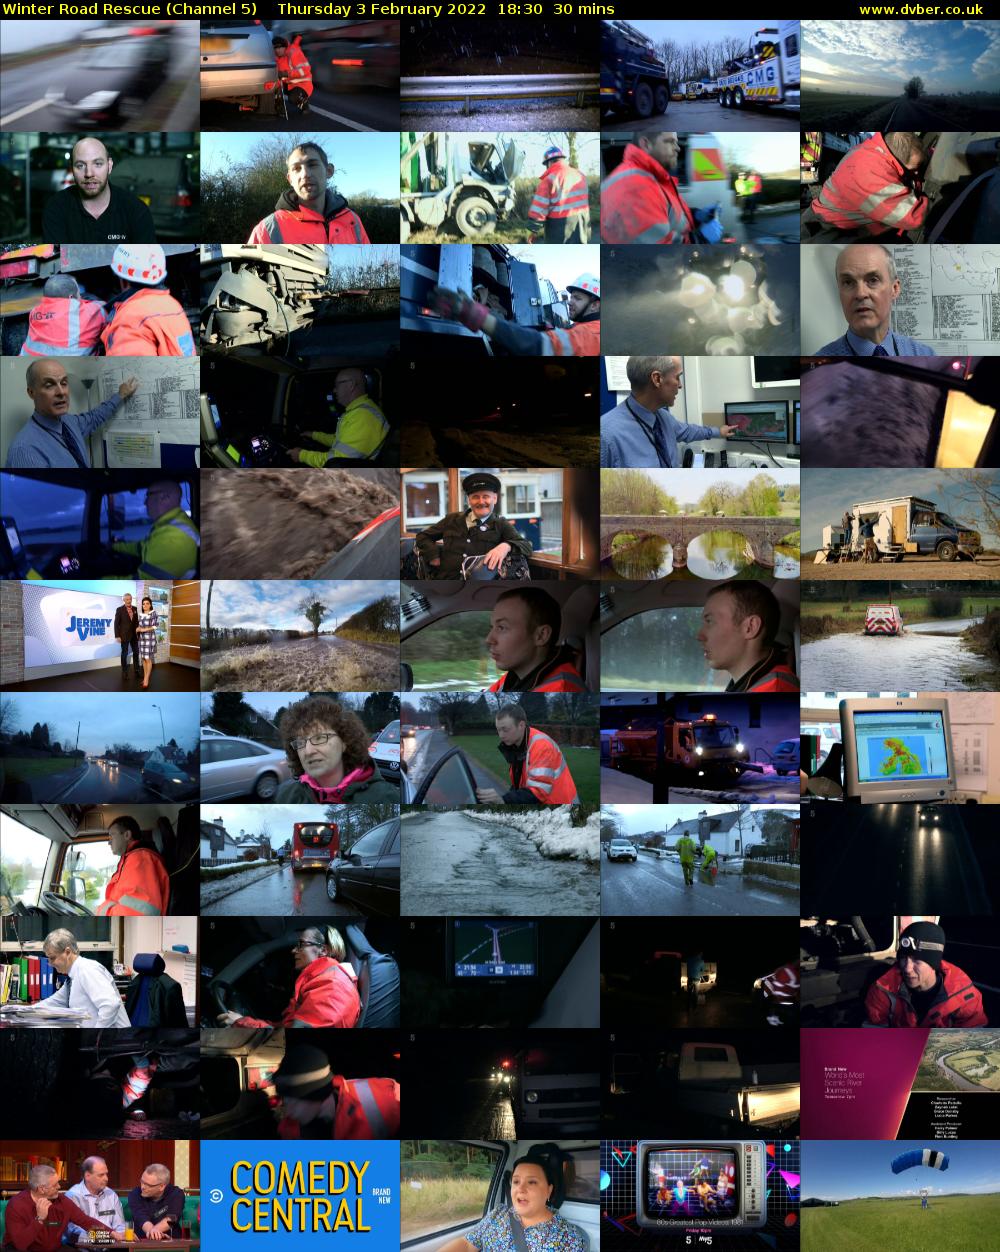 Winter Road Rescue (Channel 5) Thursday 3 February 2022 18:30 - 19:00